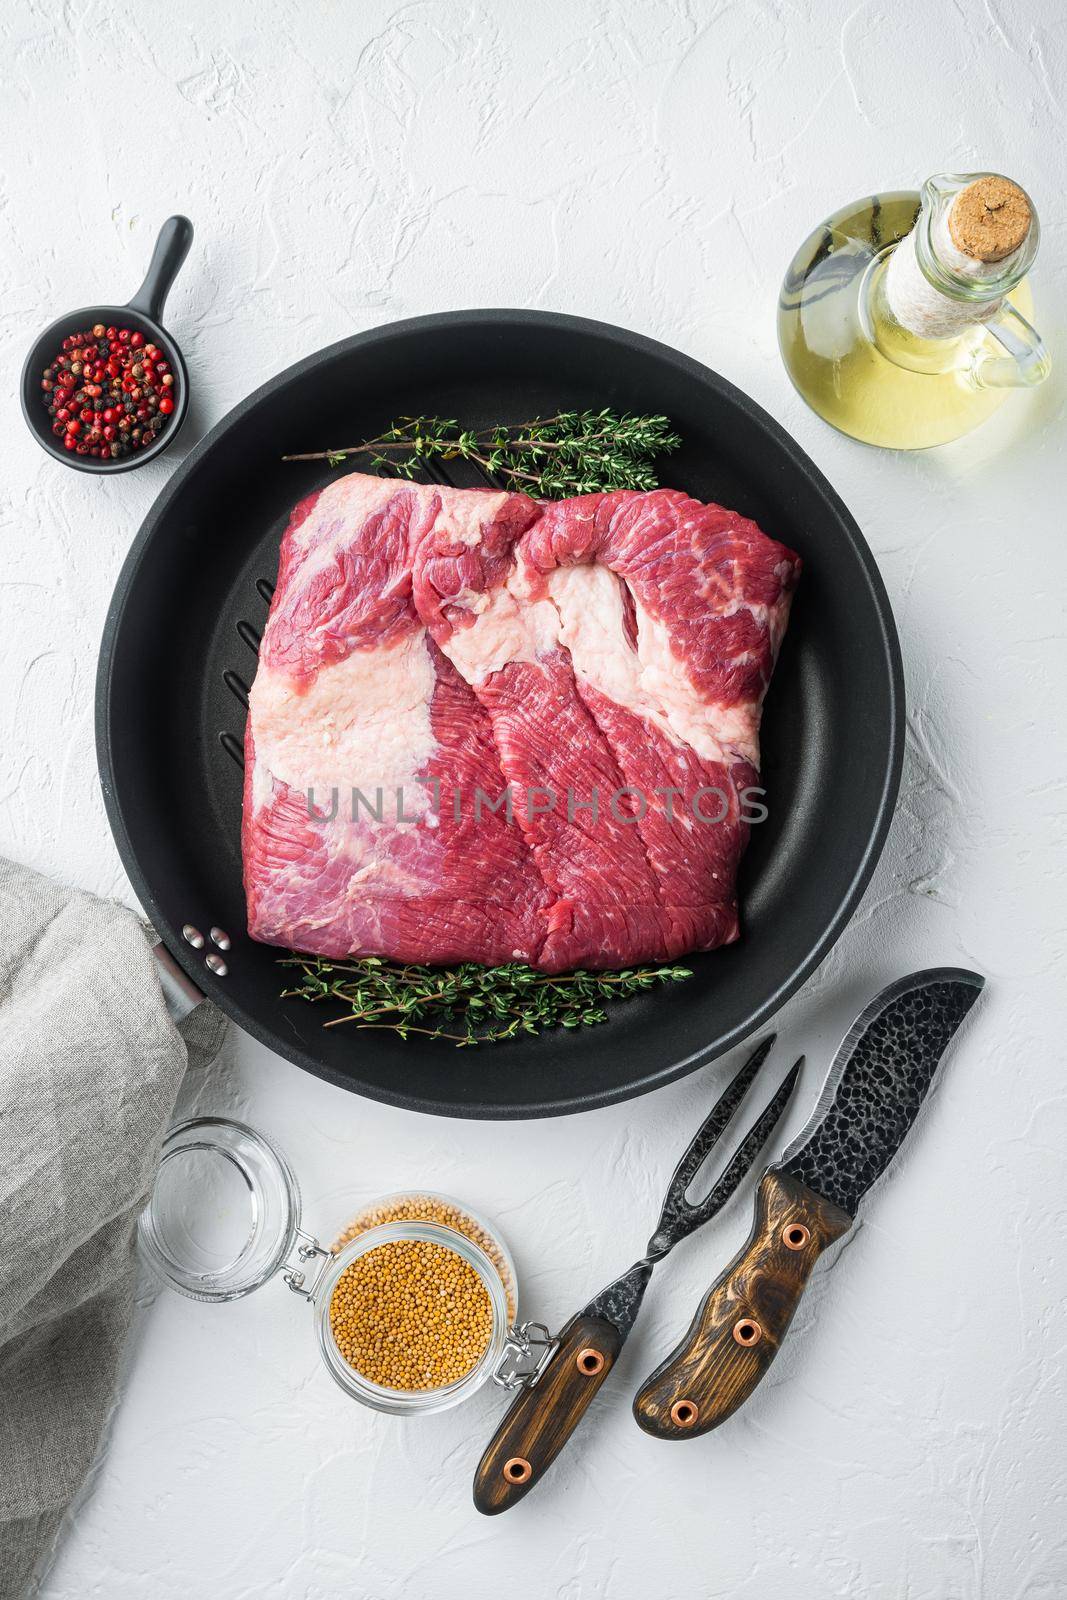 Packer brisket, raw beef brisket meat,with ingredients for smoking making barbecue, pastrami, cure, on white stone background, top view flat lay by Ilianesolenyi